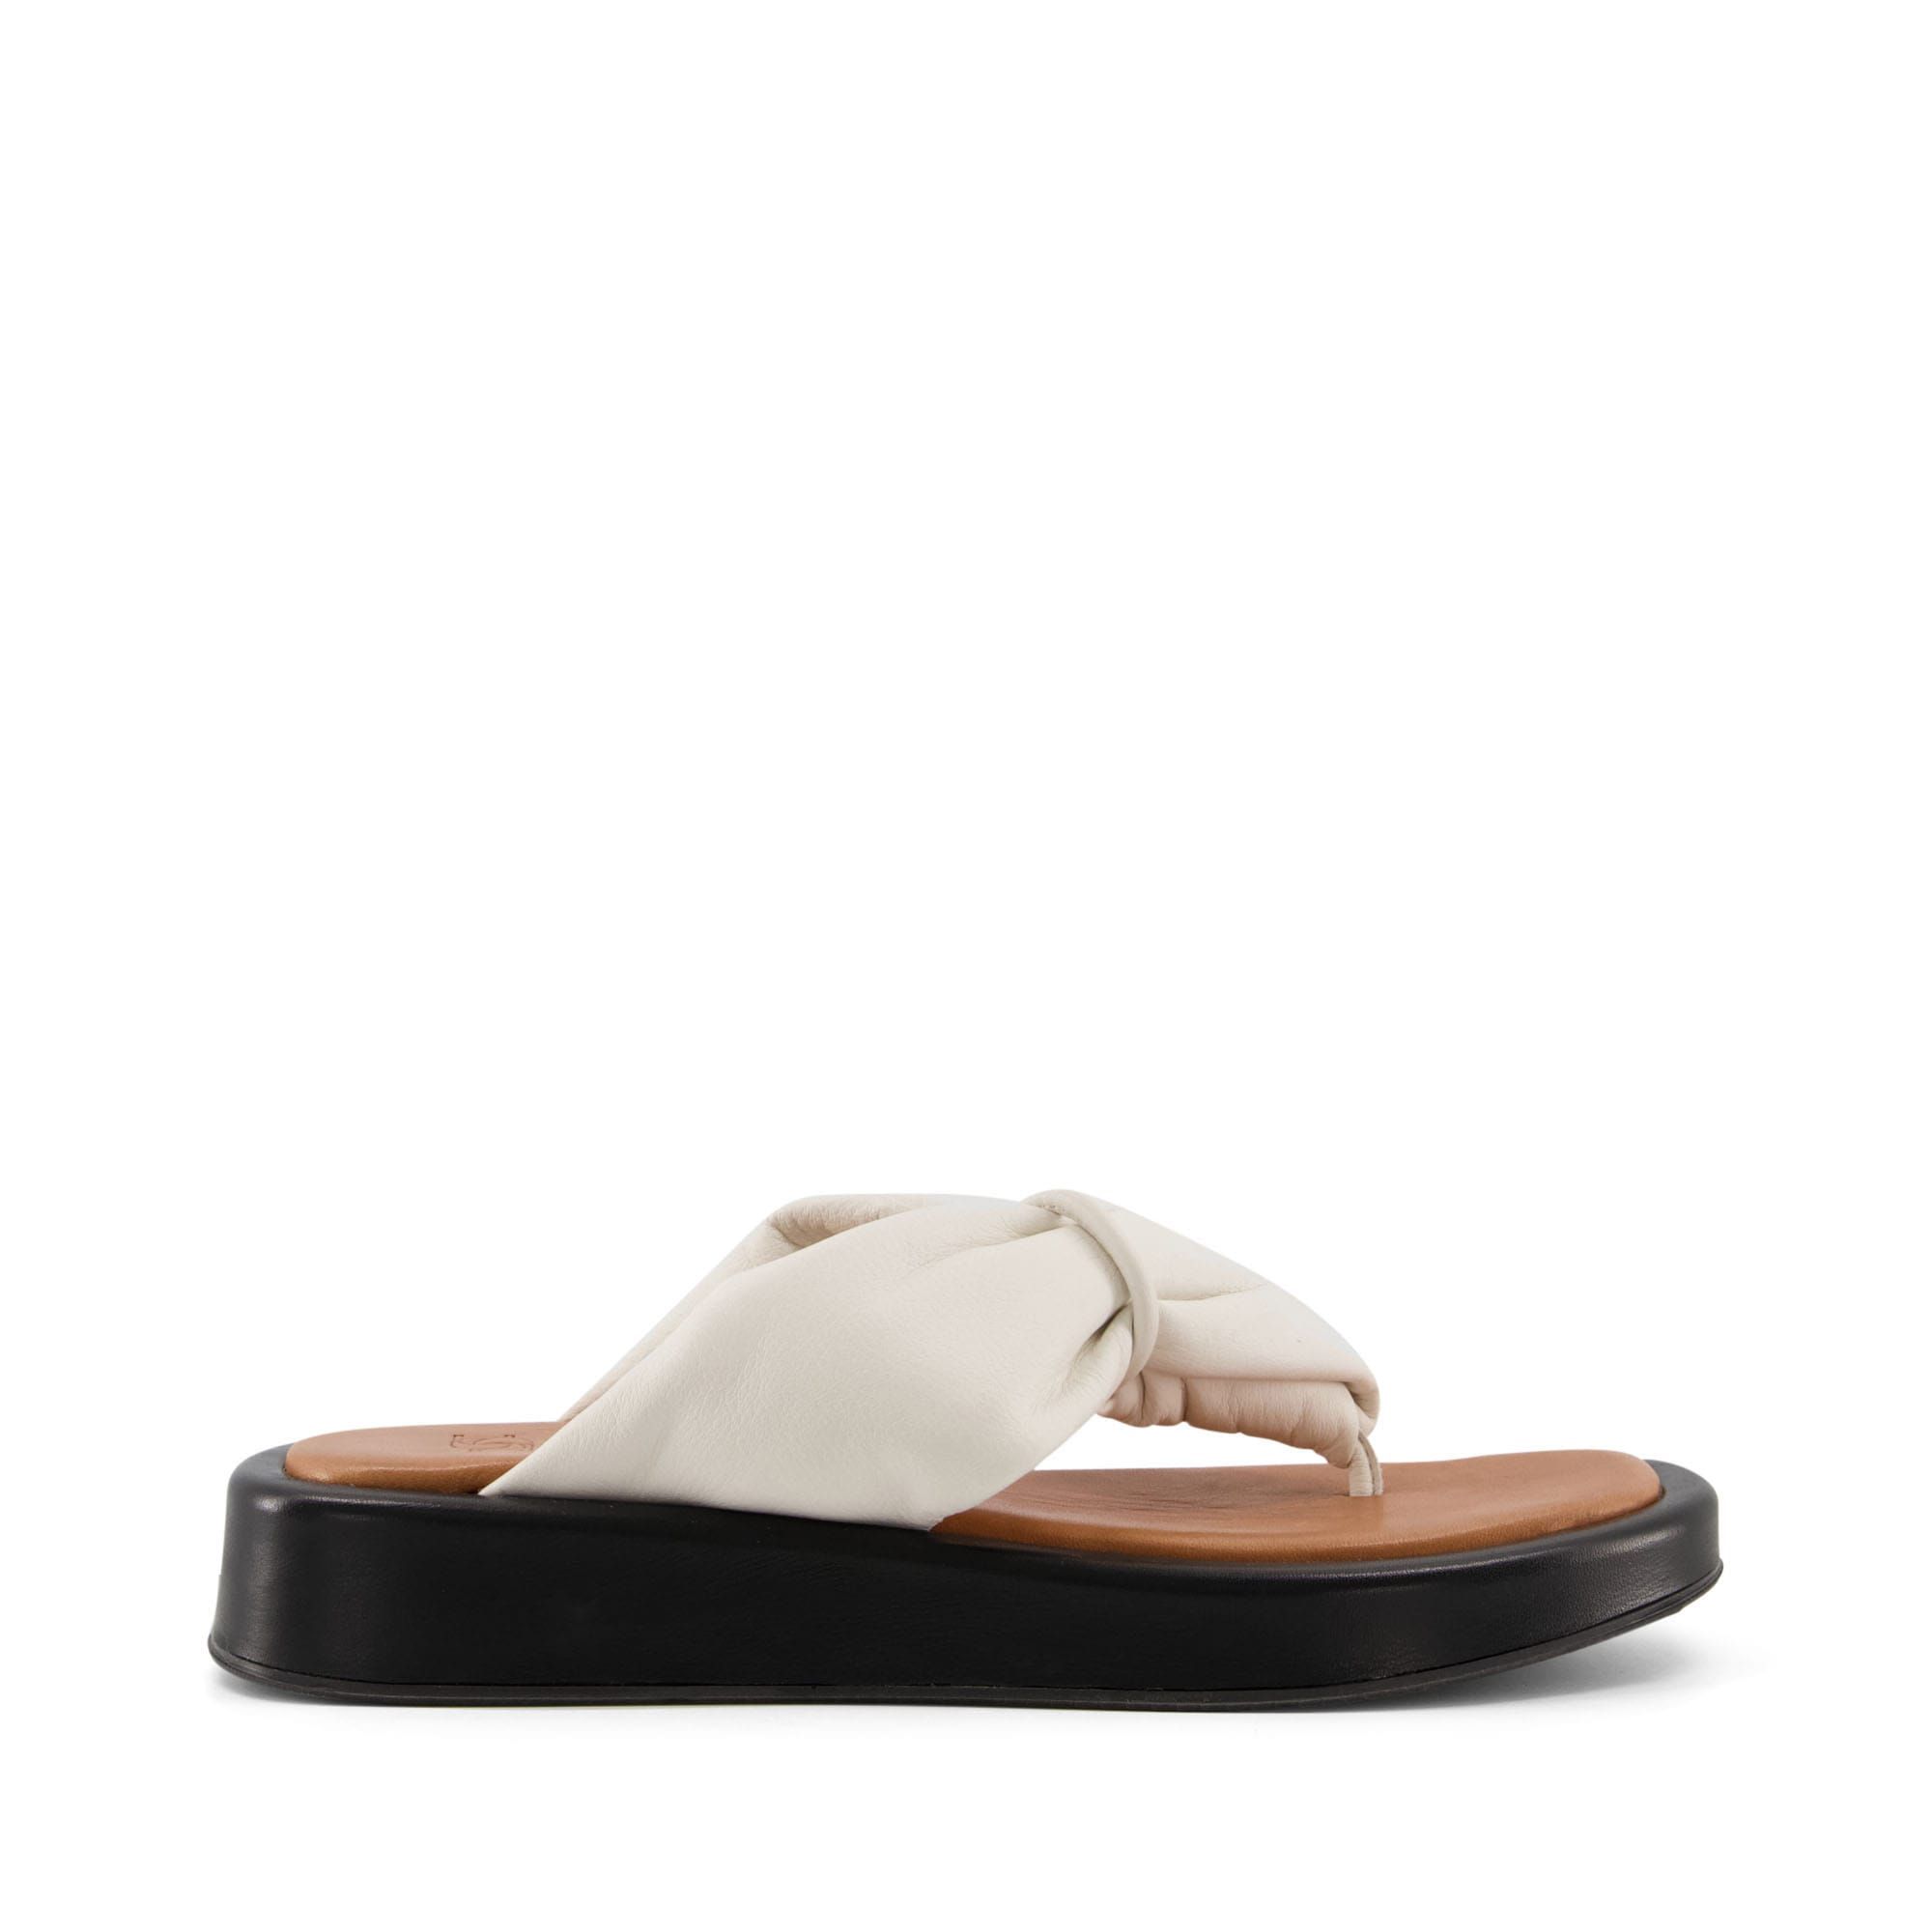 We see you, summer. The perfect combination of cool and comfortable, these sandals have been designed with padded footbeds and soft leather straps. A warm weather must-have.